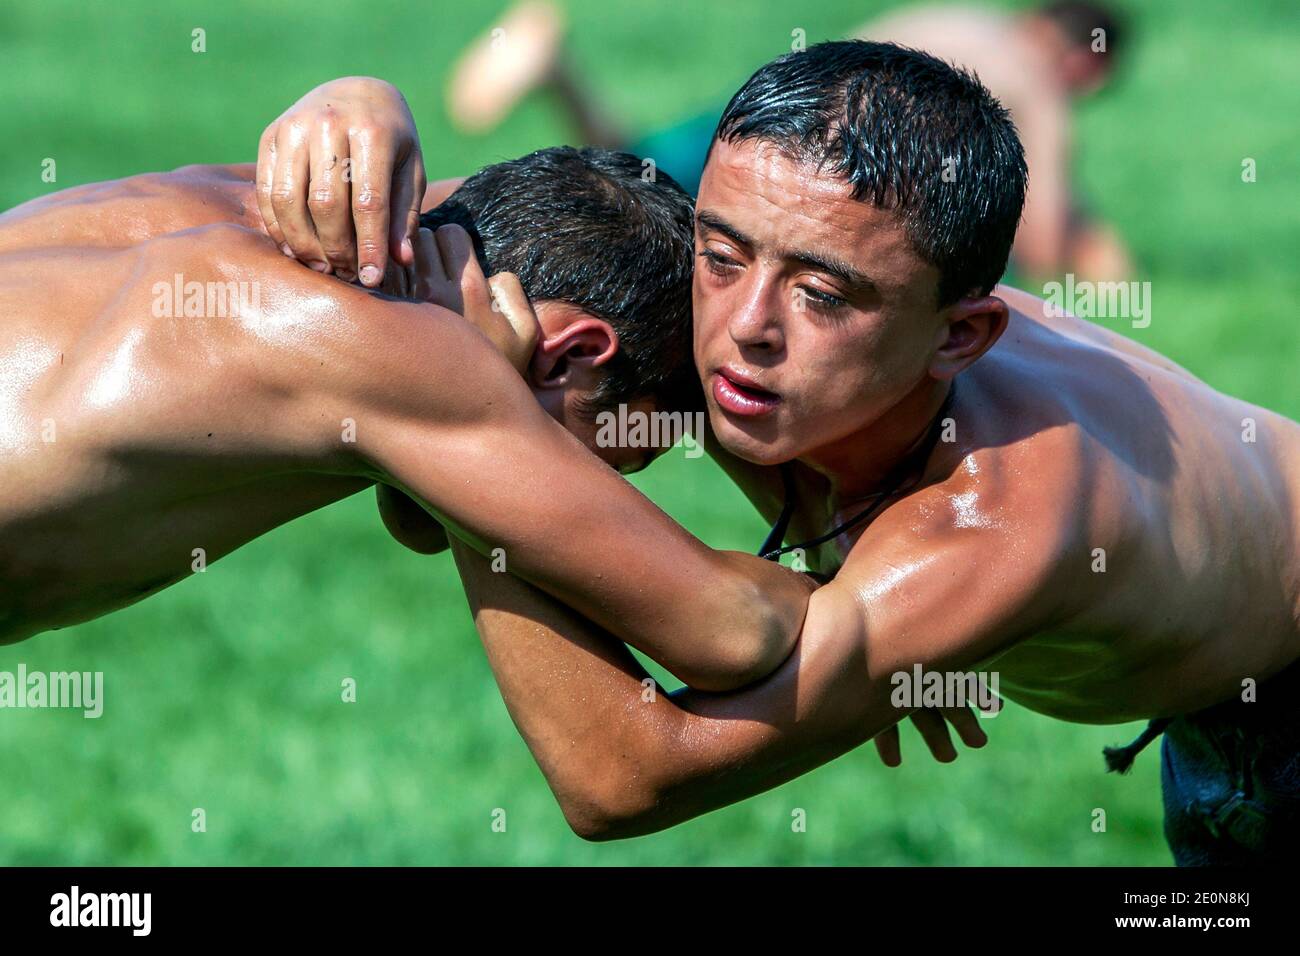 Young wrestlers with their arms locked, battle for victory at the Elmali Turkish Oil Wrestling Festival in Turkey. Stock Photo